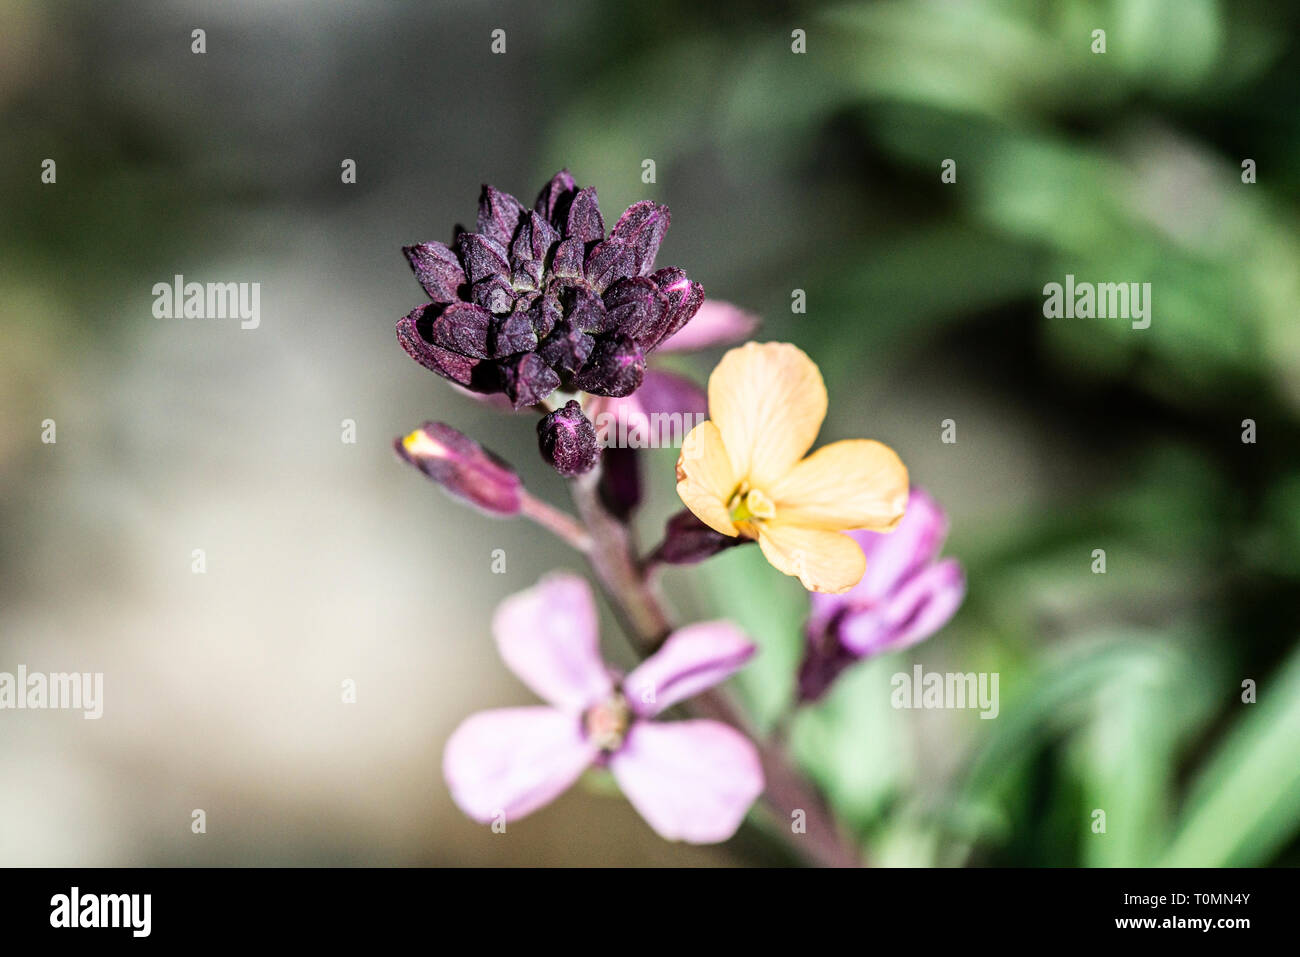 A close up of the flowers of a Erysimum 'Chelsea Jacket' Stock Photo